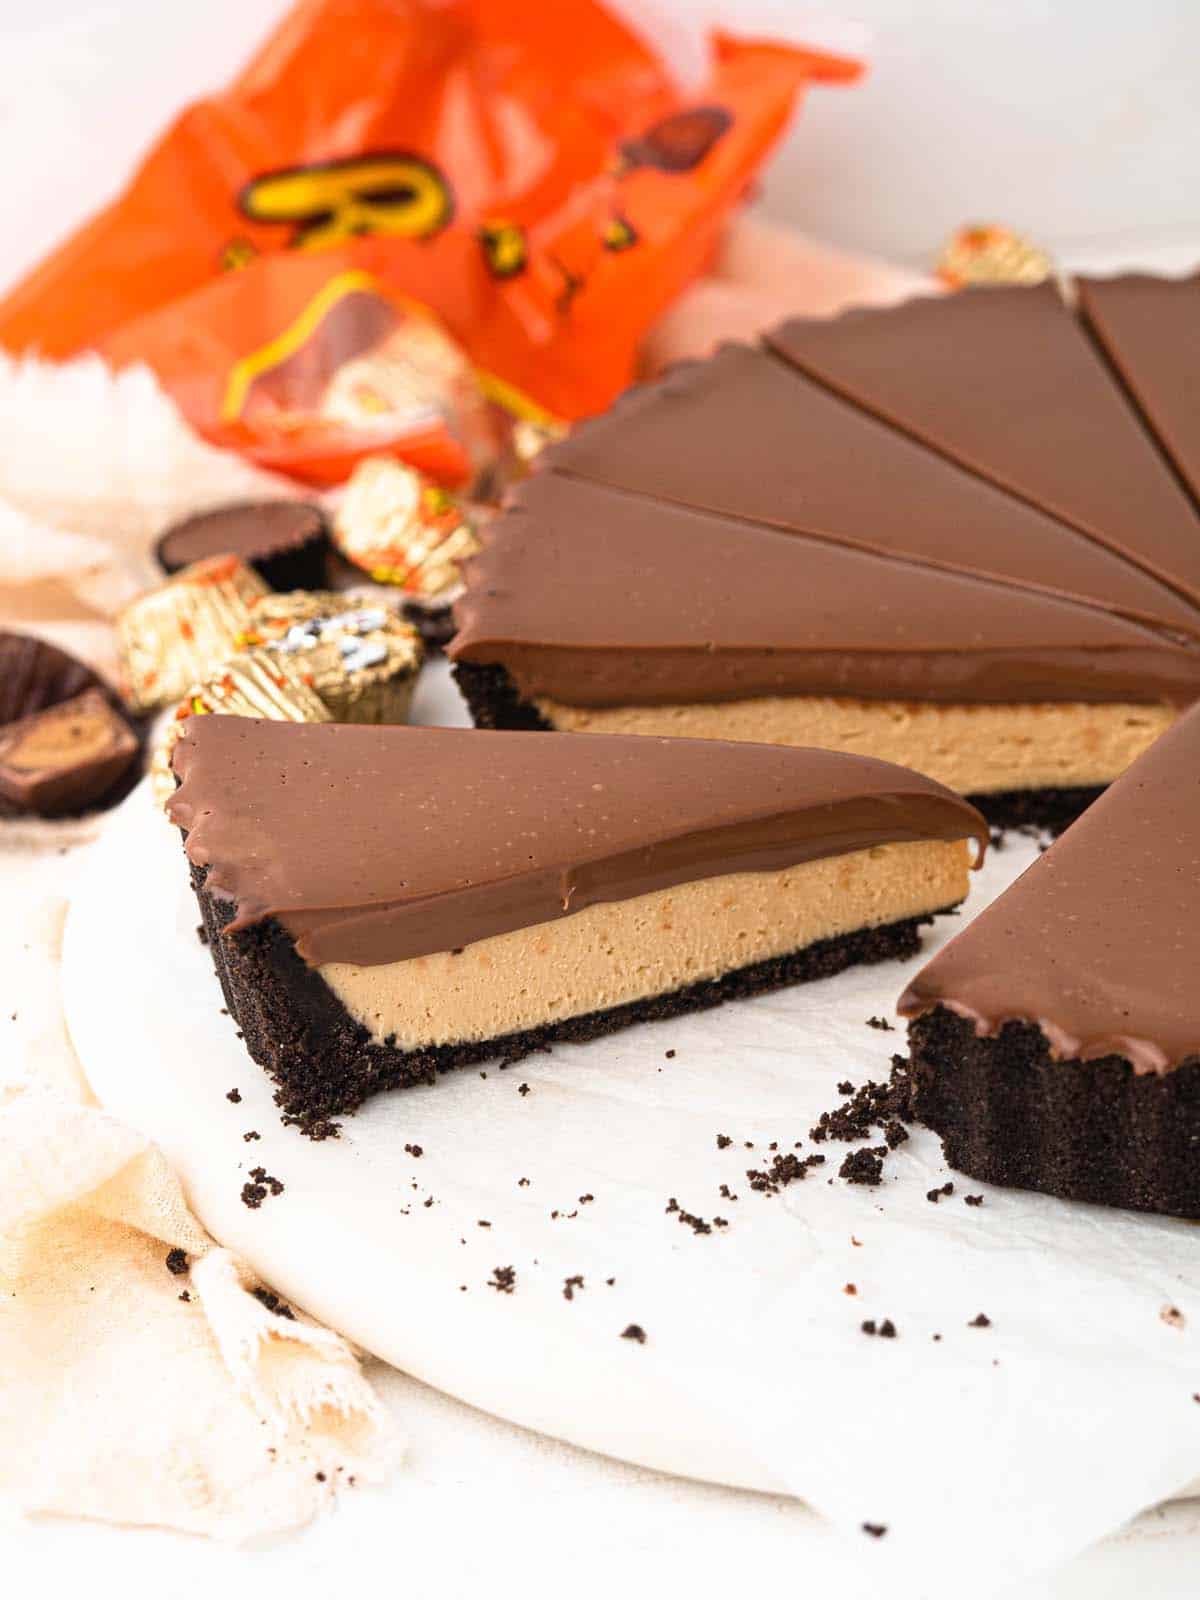 No-bake reese’s chocolate peanut butter tart with an oreo crust